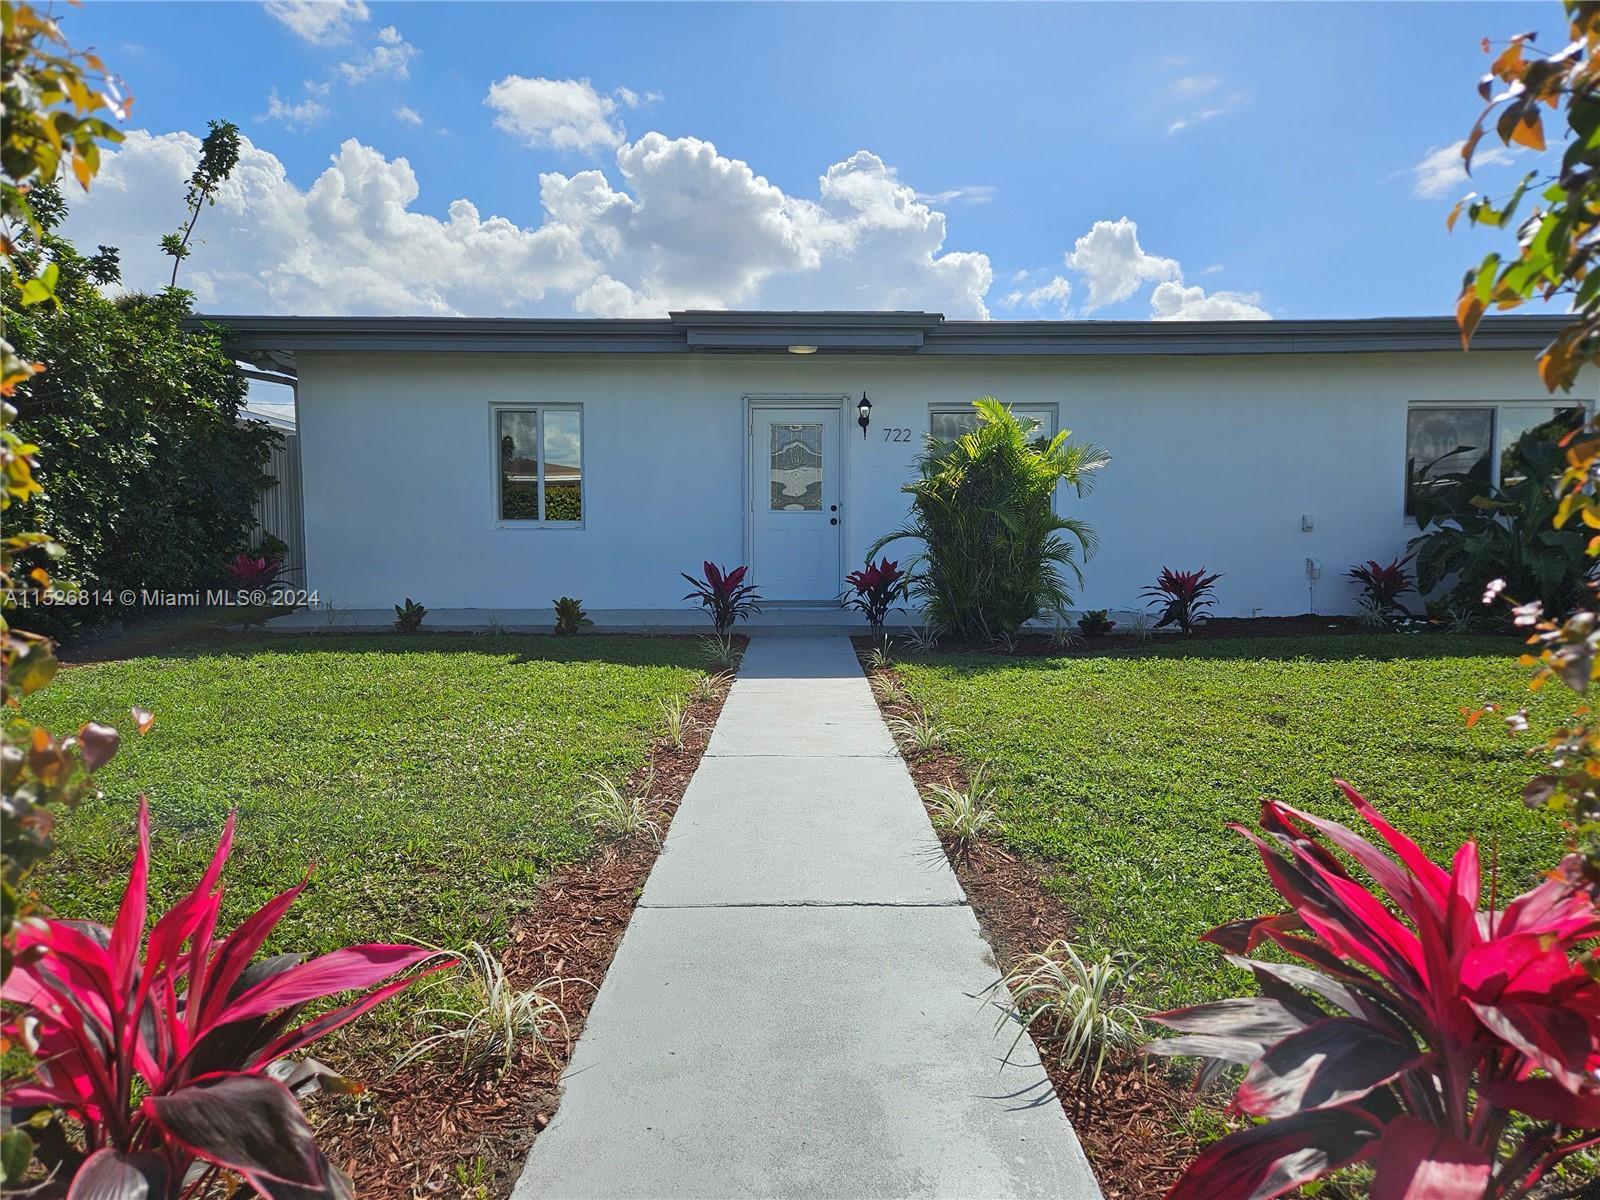 Move in ready! An amazing opportunity to own this renovated 4 bedroom 3 bath turnkey home featuring 